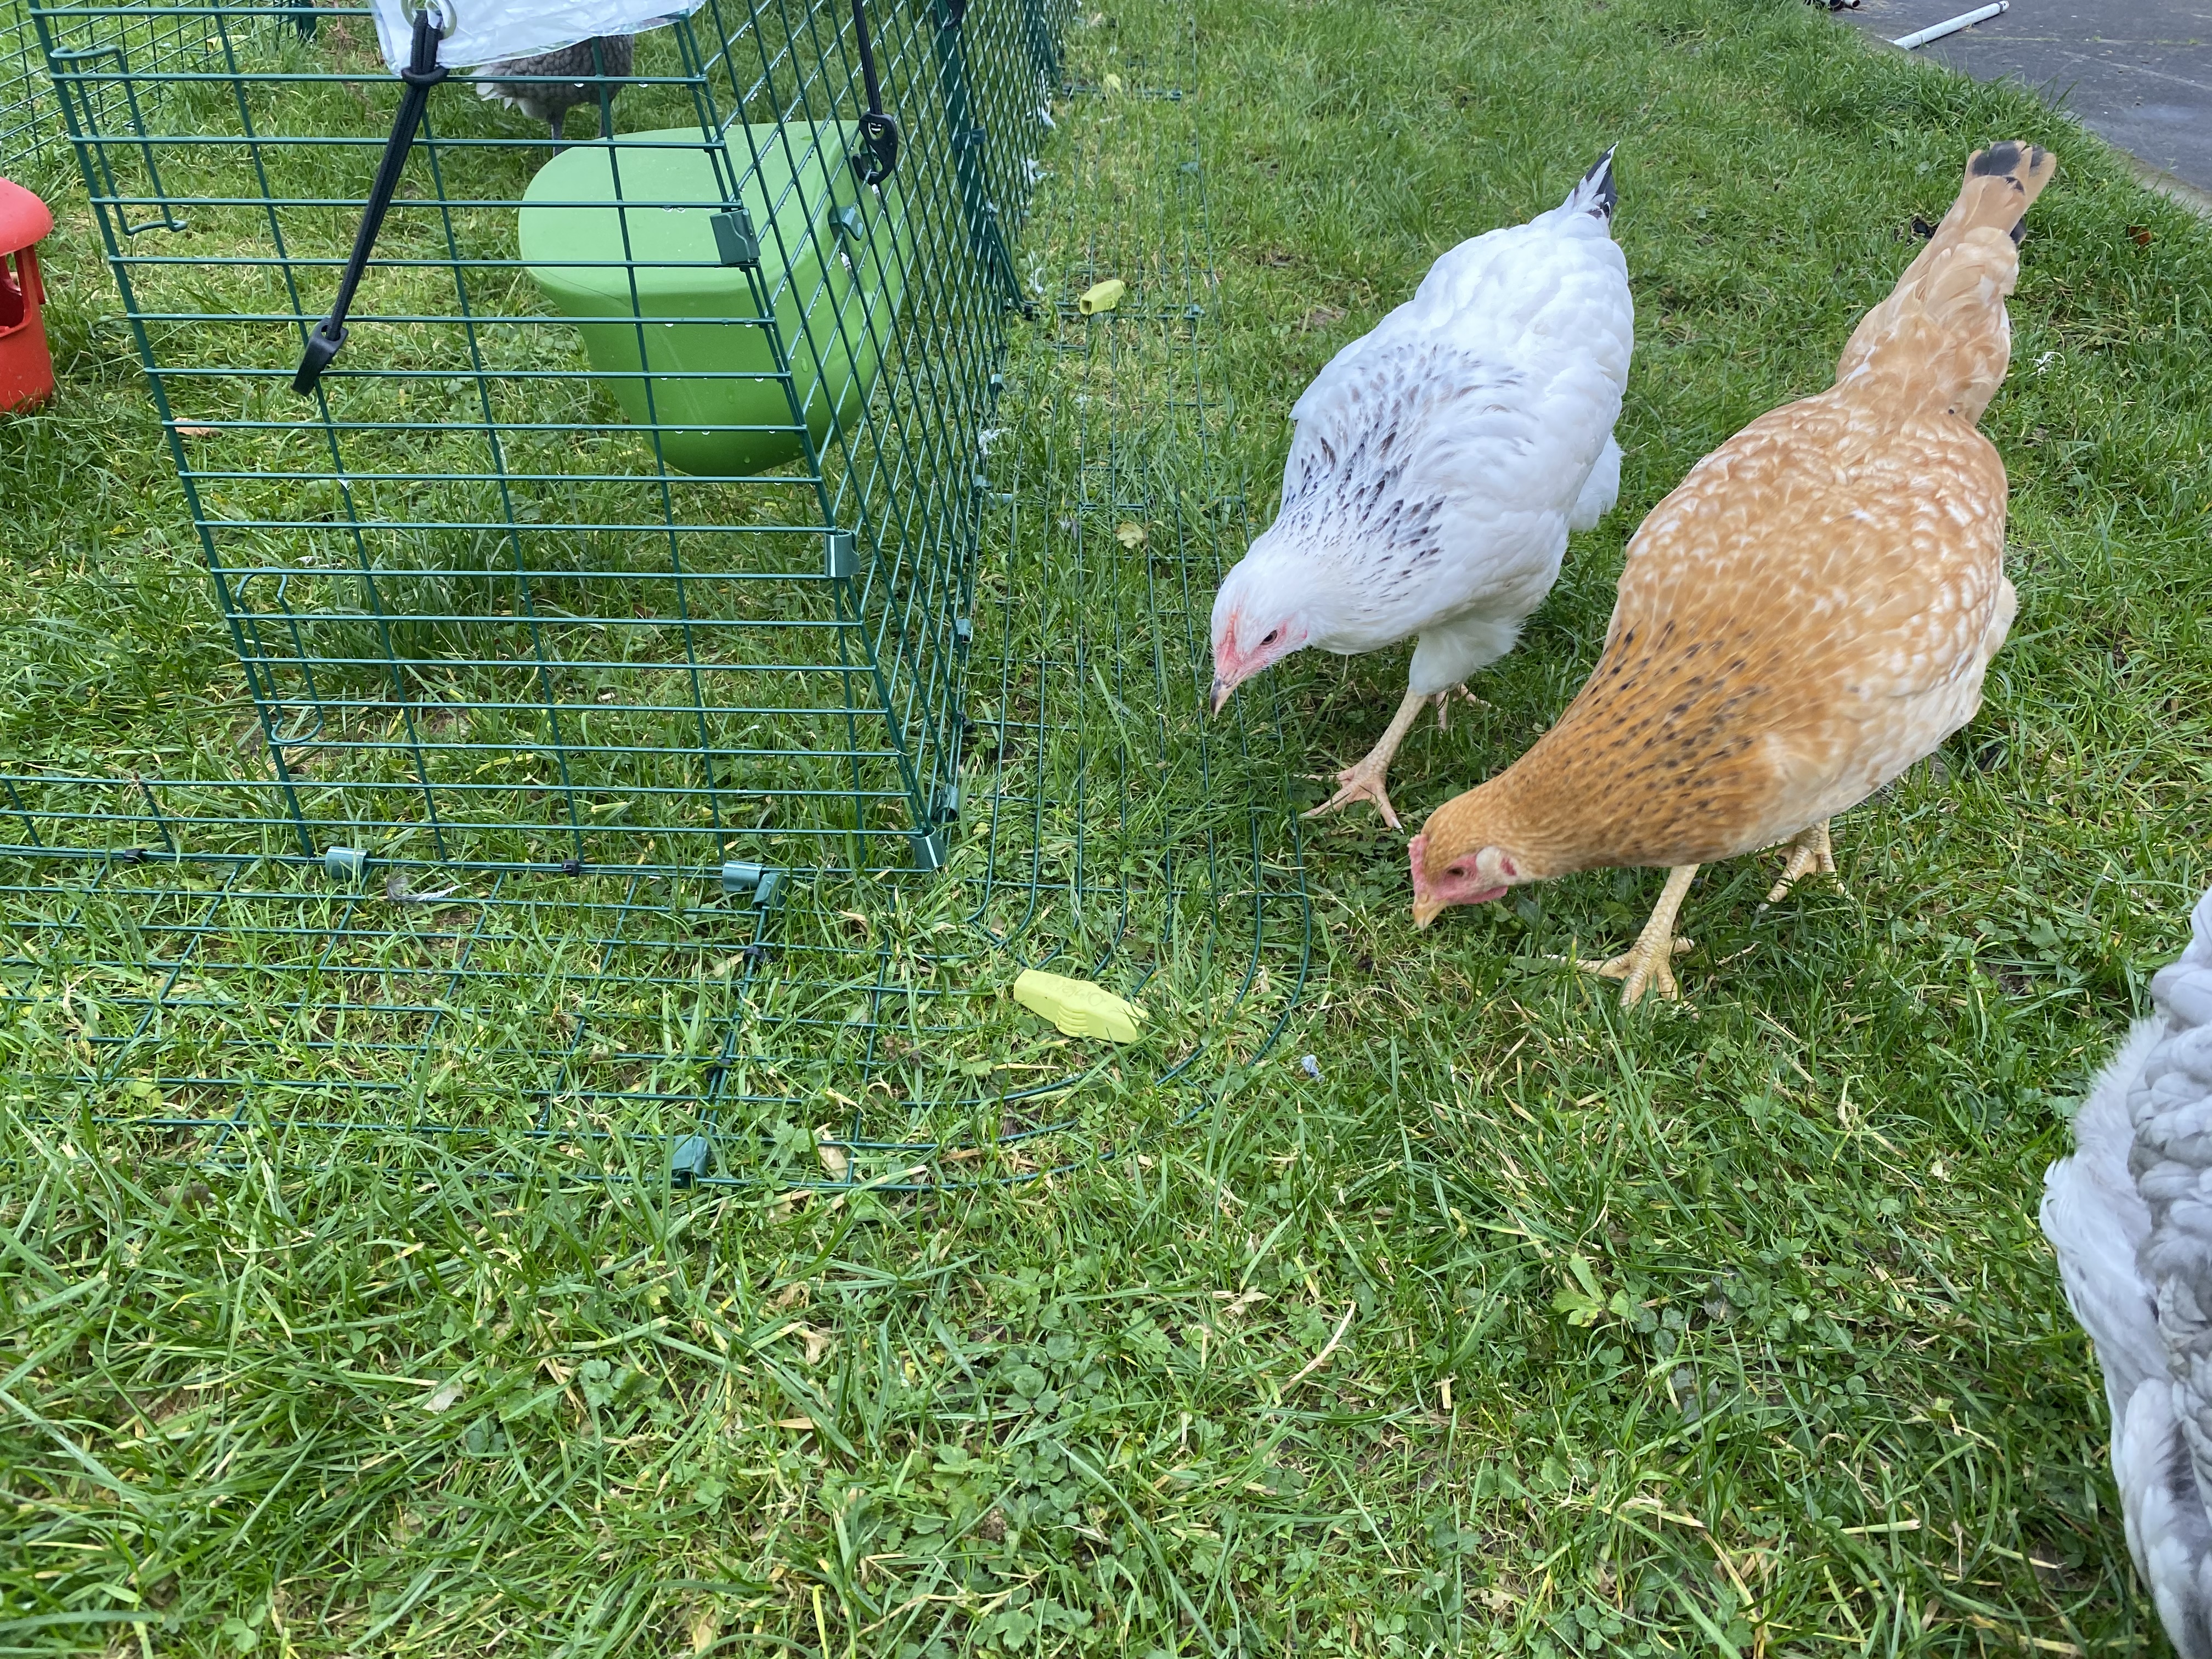 Chickens inspecting the ground anchors 